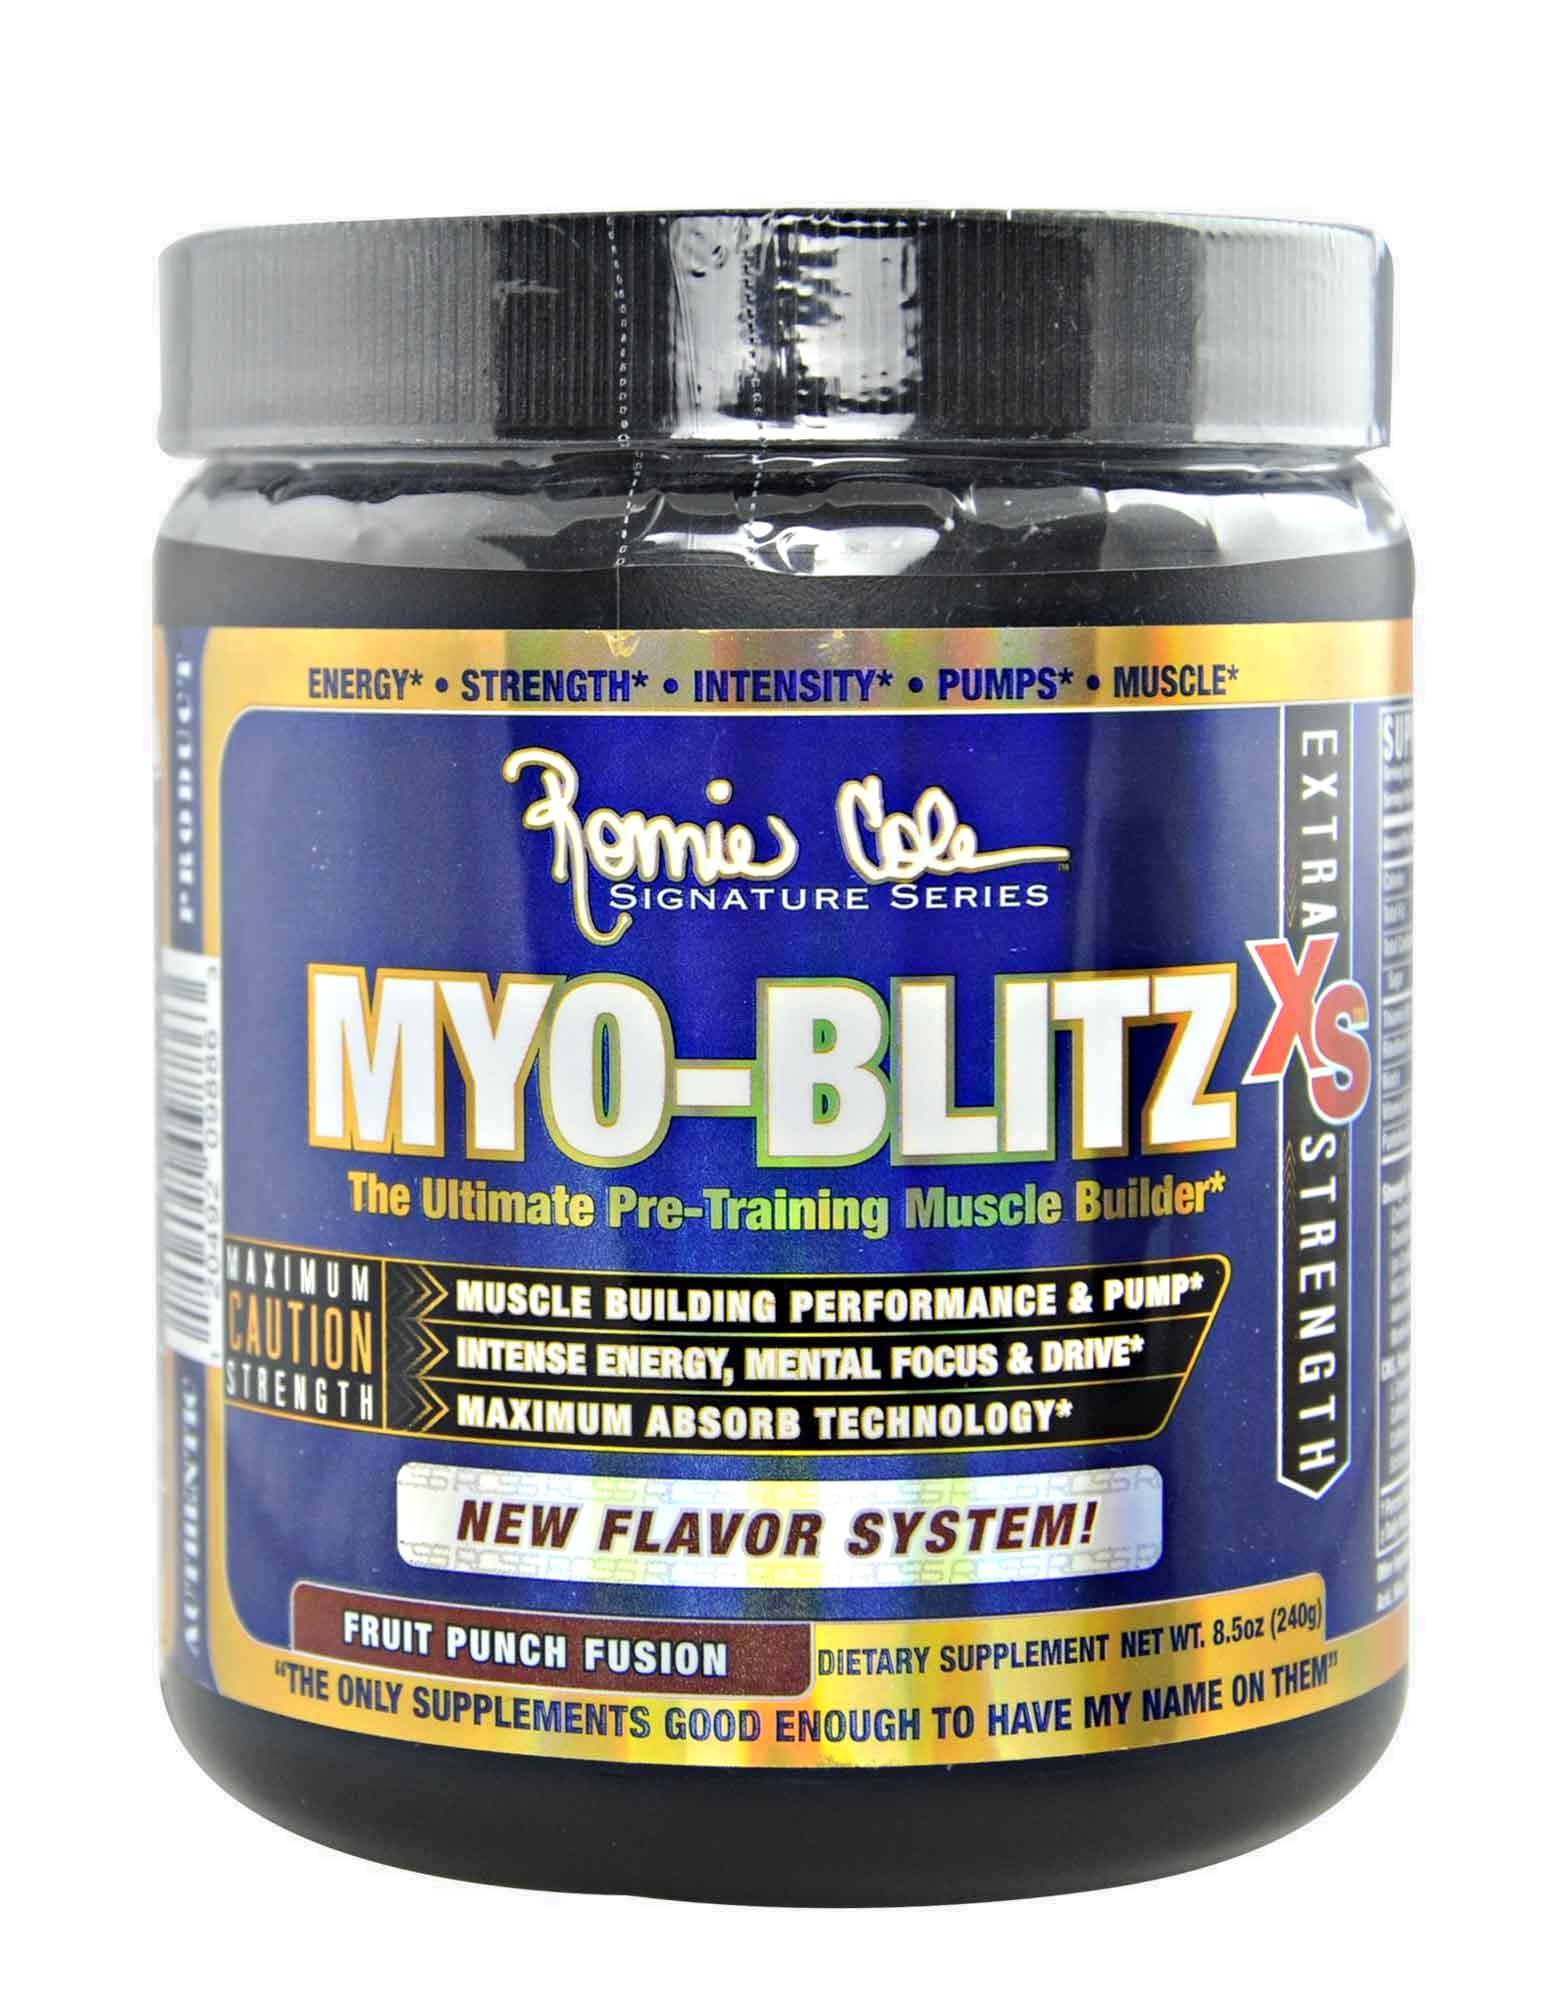 Best Myo blitz pre workout review for Challenge